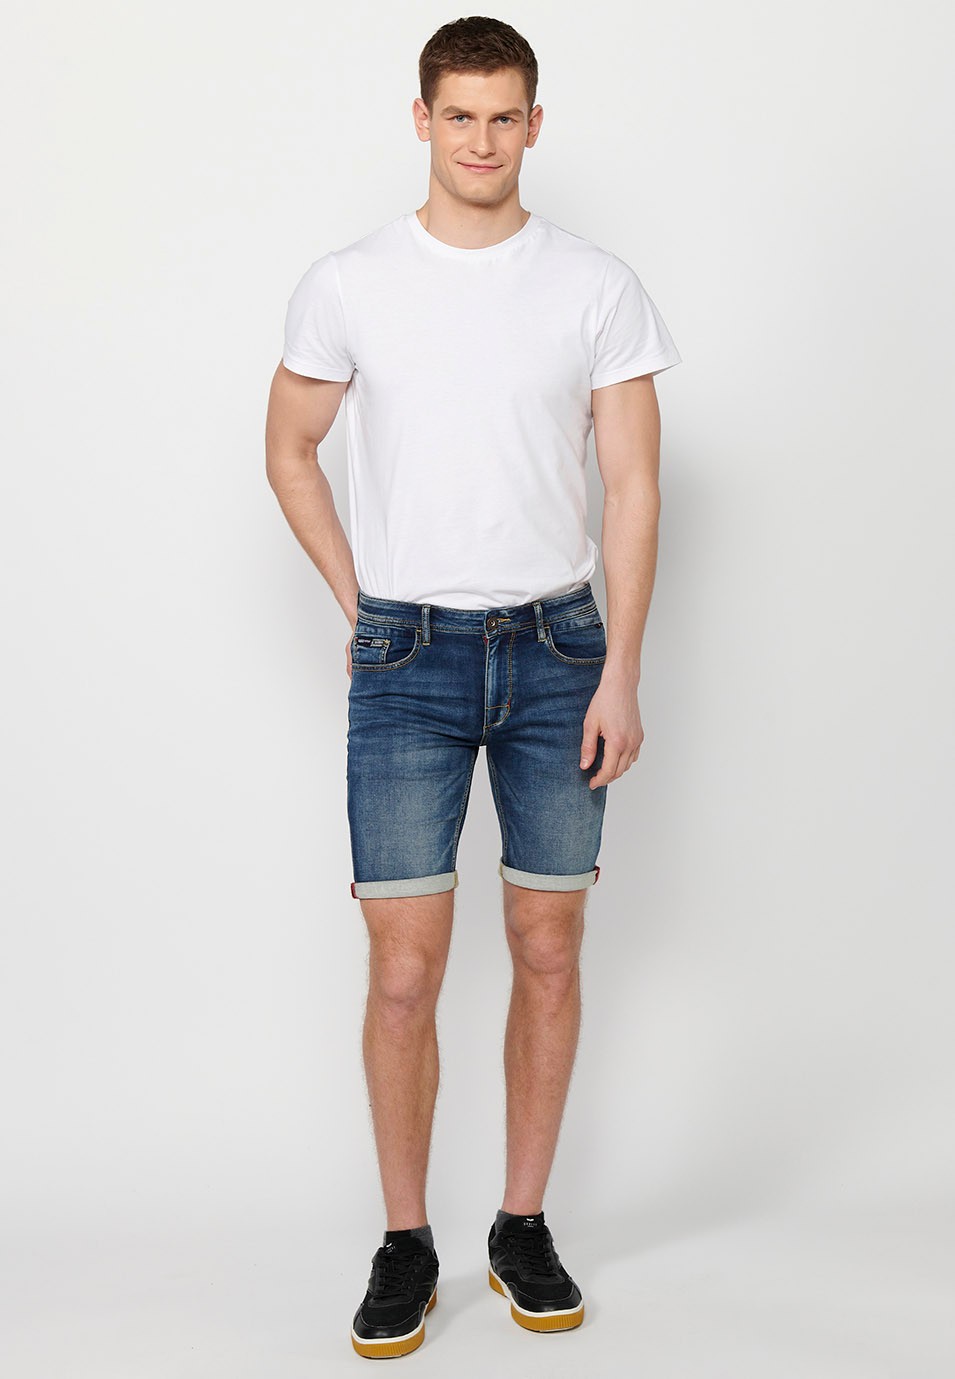 Bermuda shorts with turn-up closure with front zip and button closure in Blue for Men